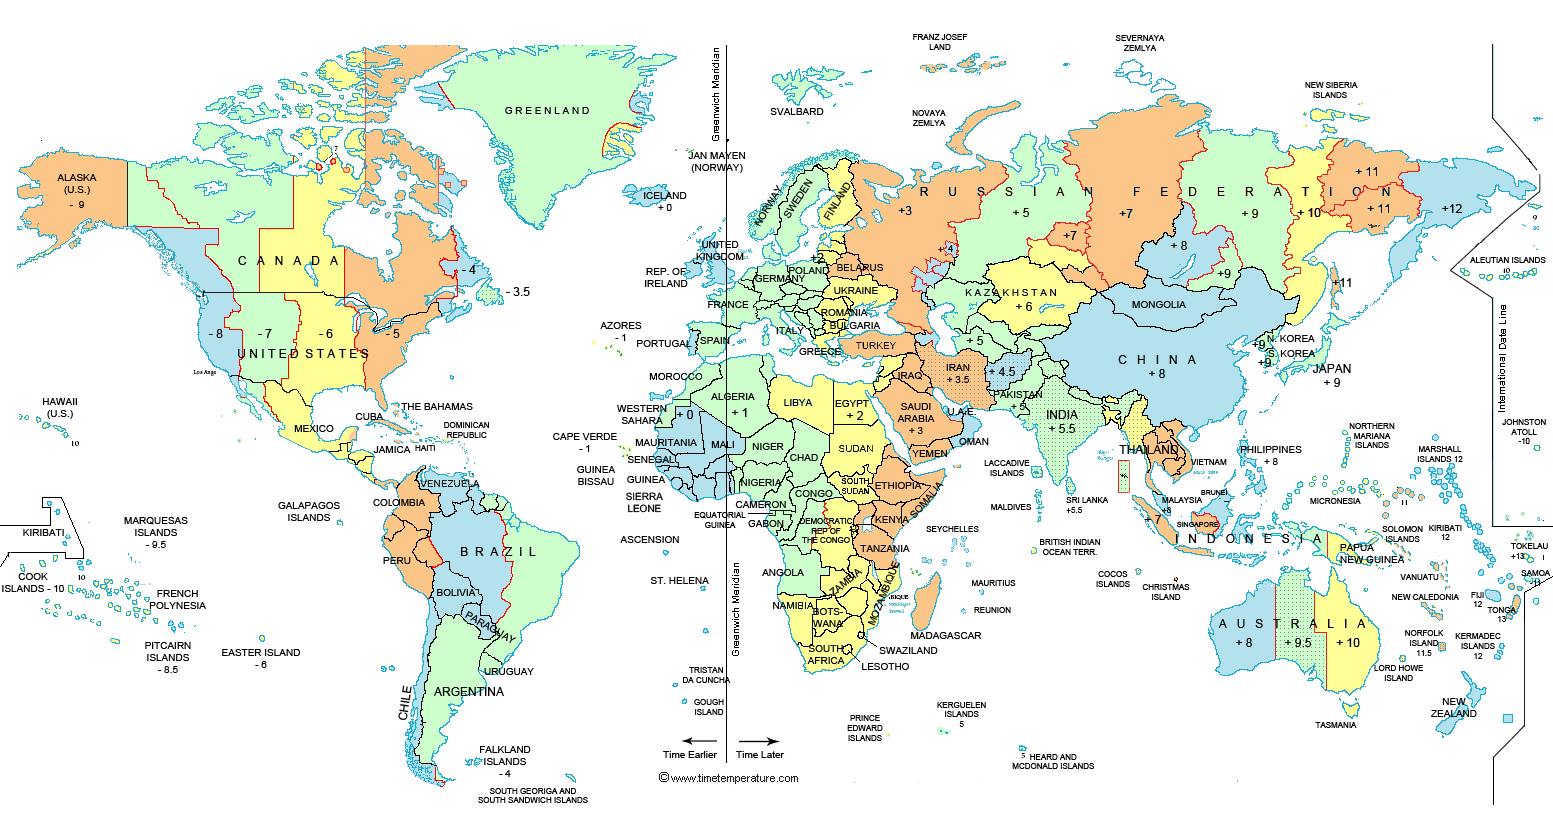 expanded-world-time-zone-map.gif